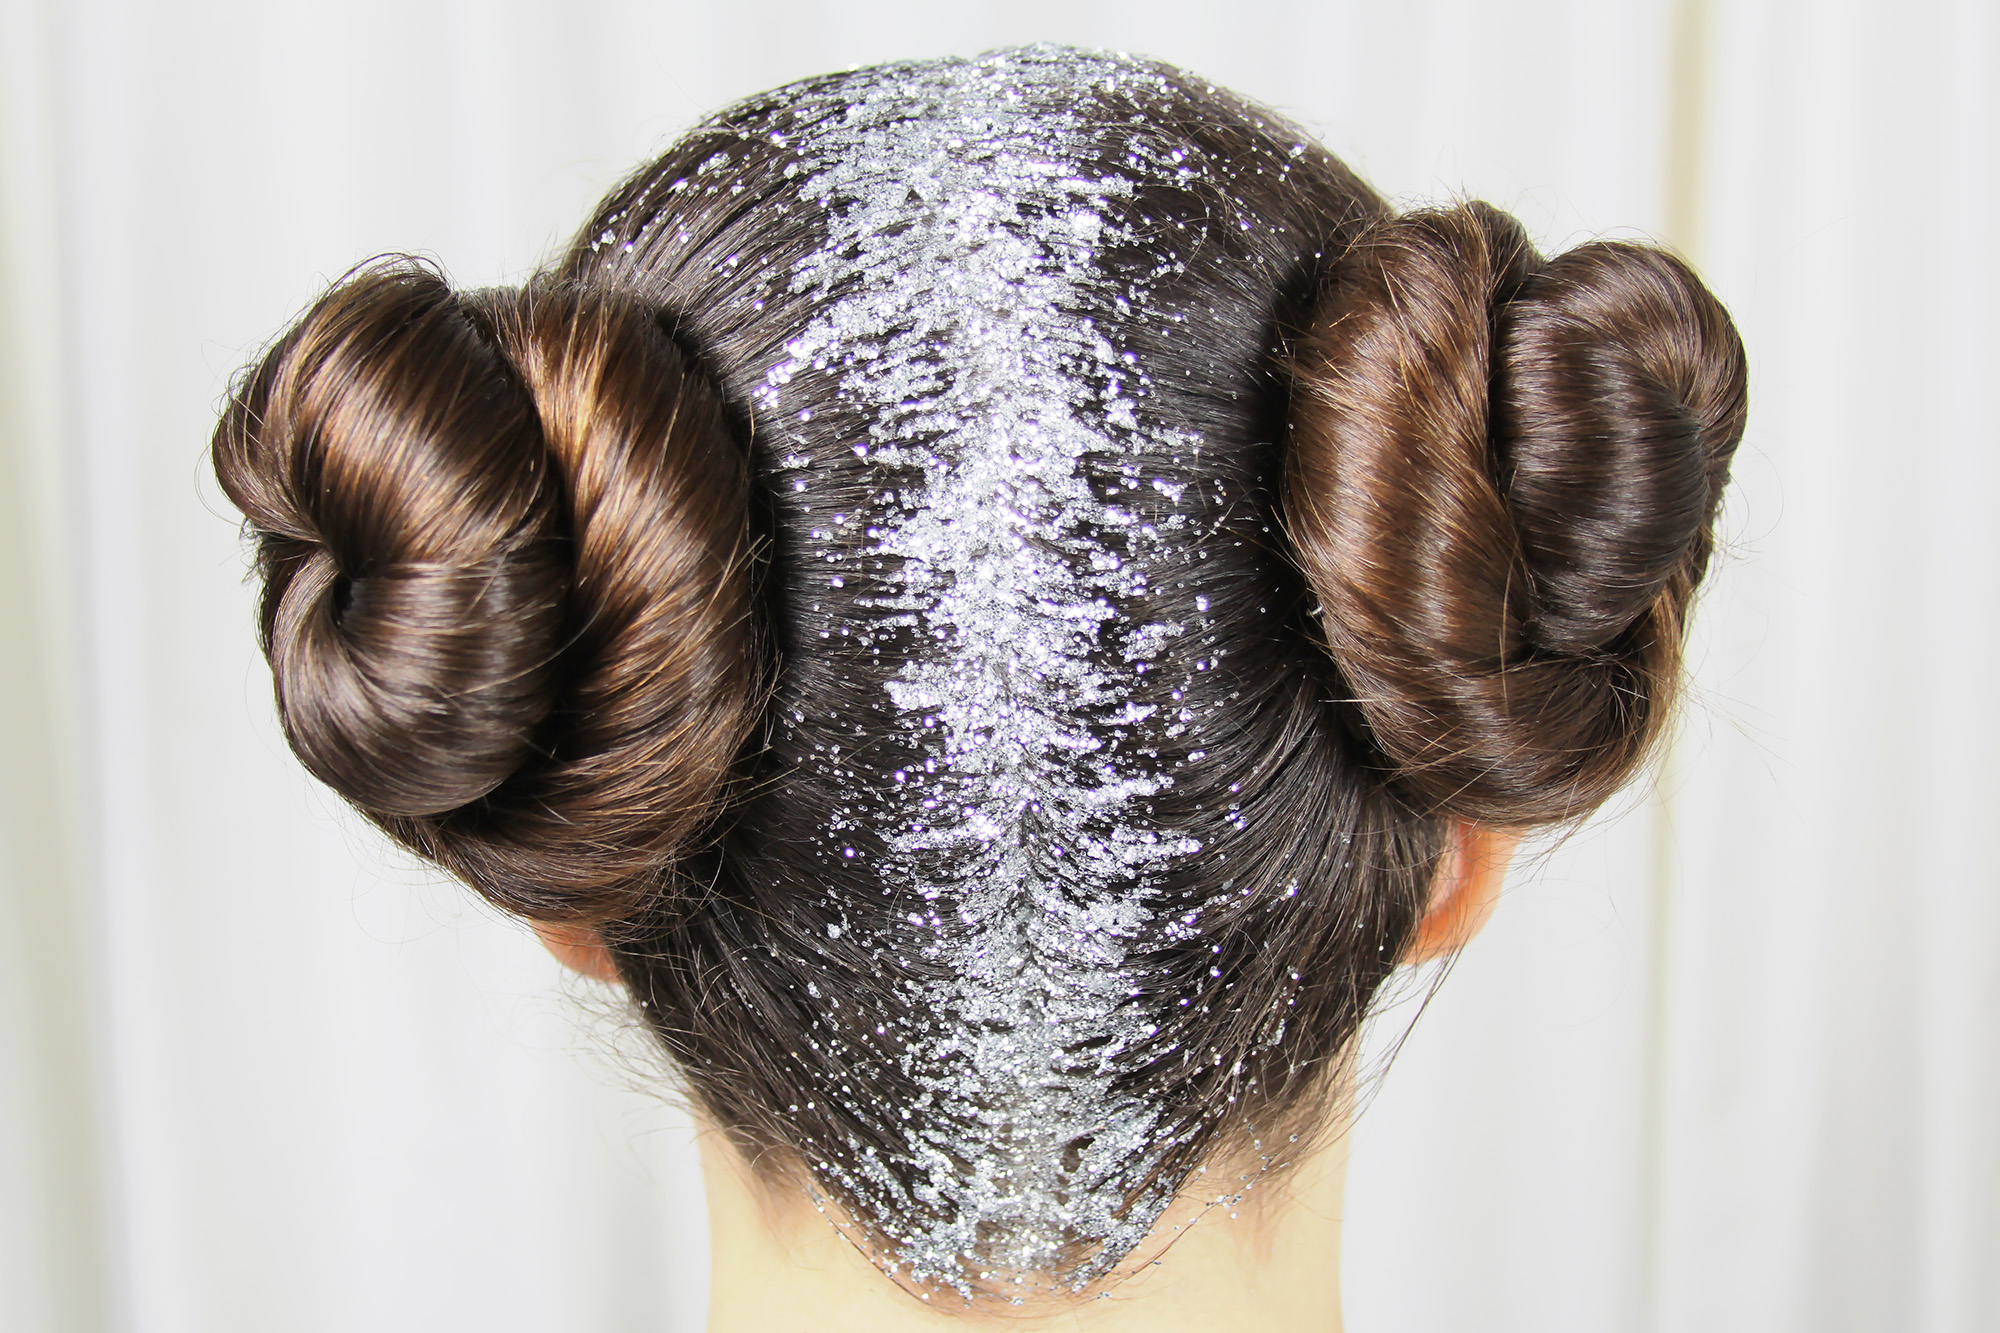 Glitter For Carrie - Star Wars Princess Leia inspired hairstyle with silver glitter